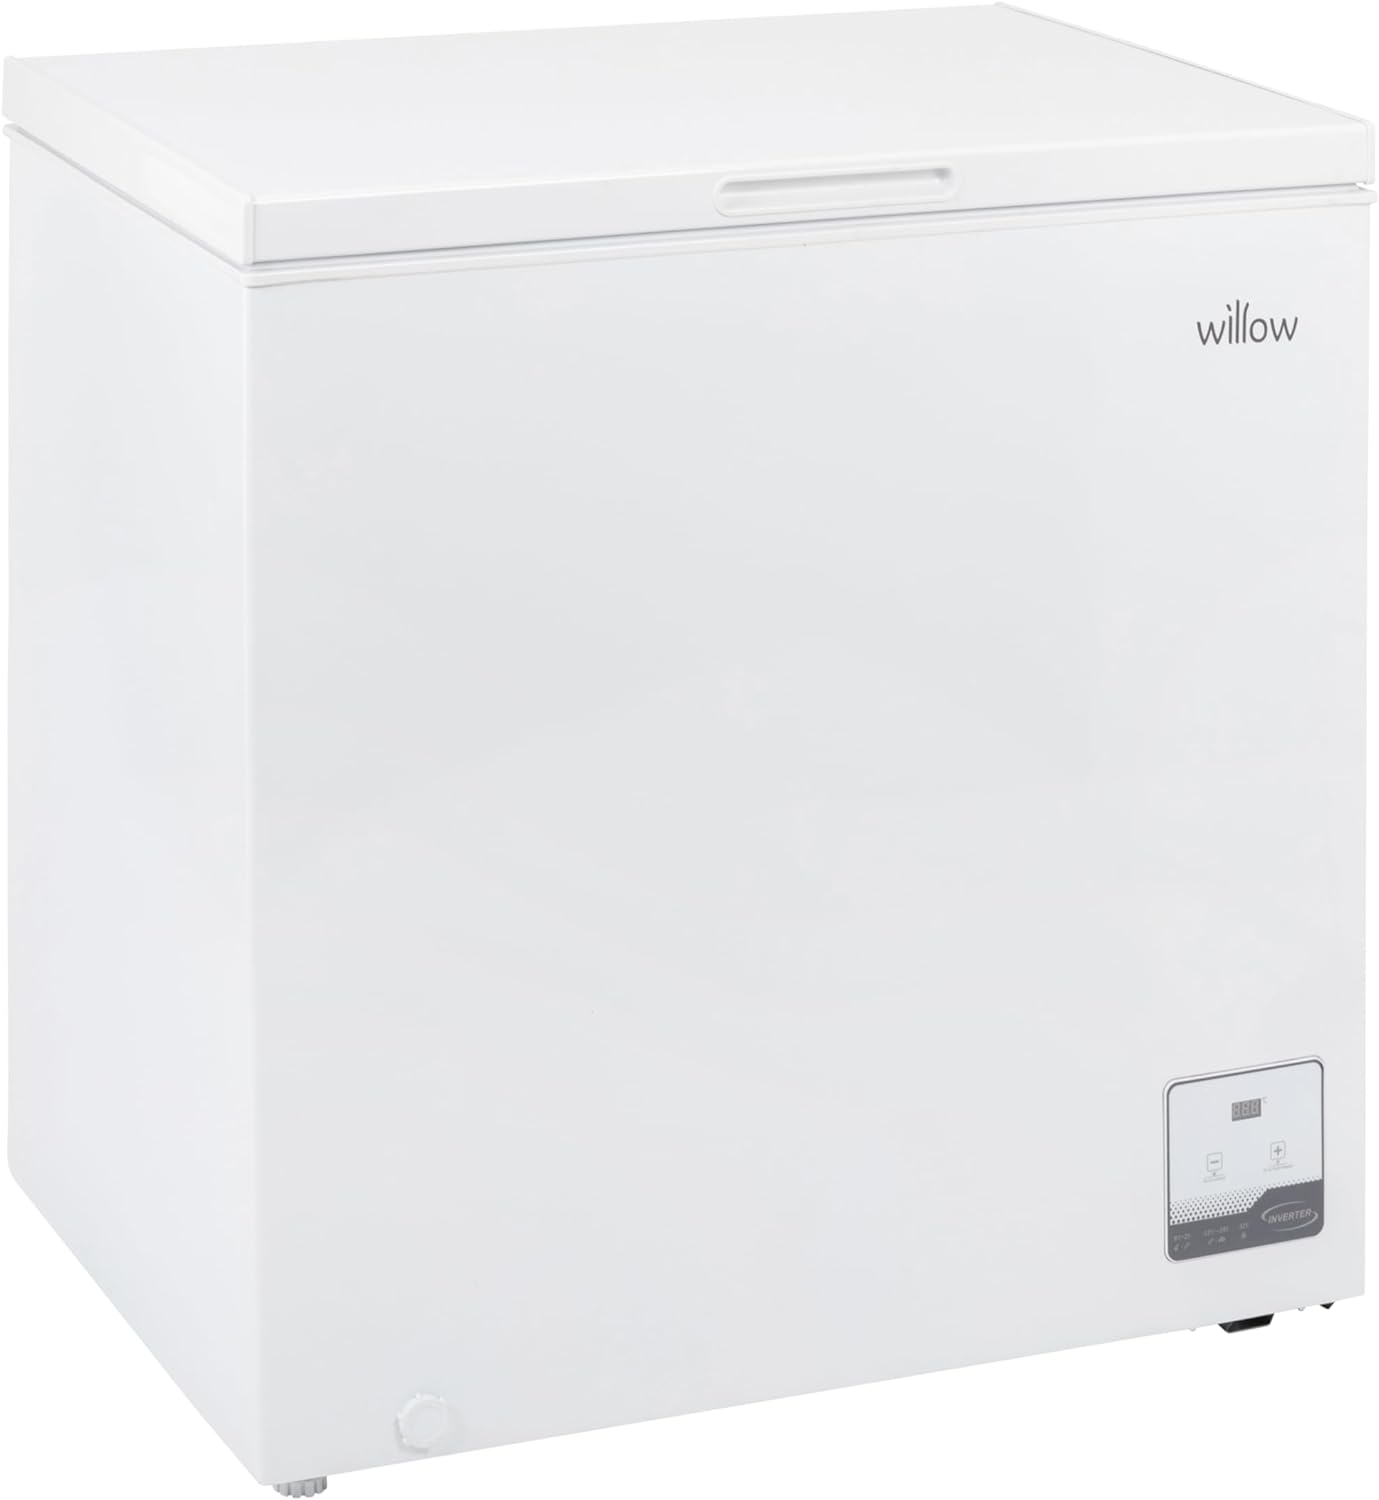 Willow W198CFWD 199L Freestanding Chest Freezer with Removable Storage Basket, Digital Temperature Control, 4* Freezer Rating, Low Noise - White - Amazing Gadgets Outlet